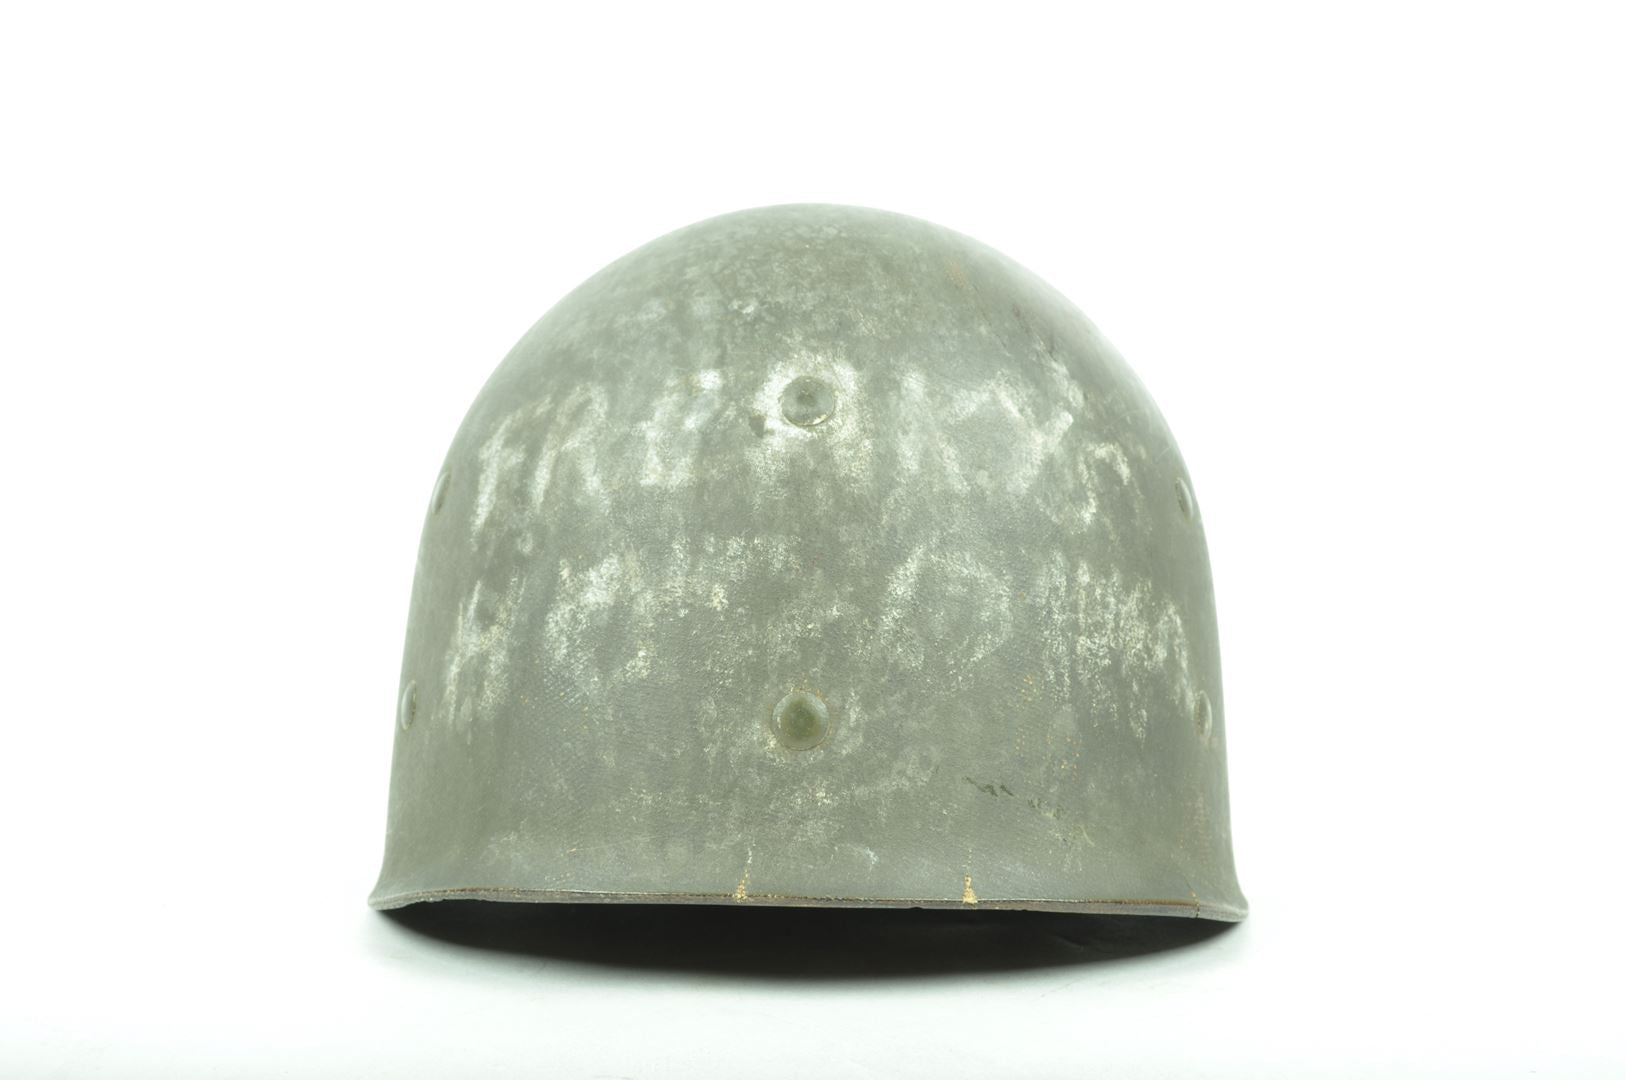 Grouping US AIR FORCE / Sous Casque Seaman